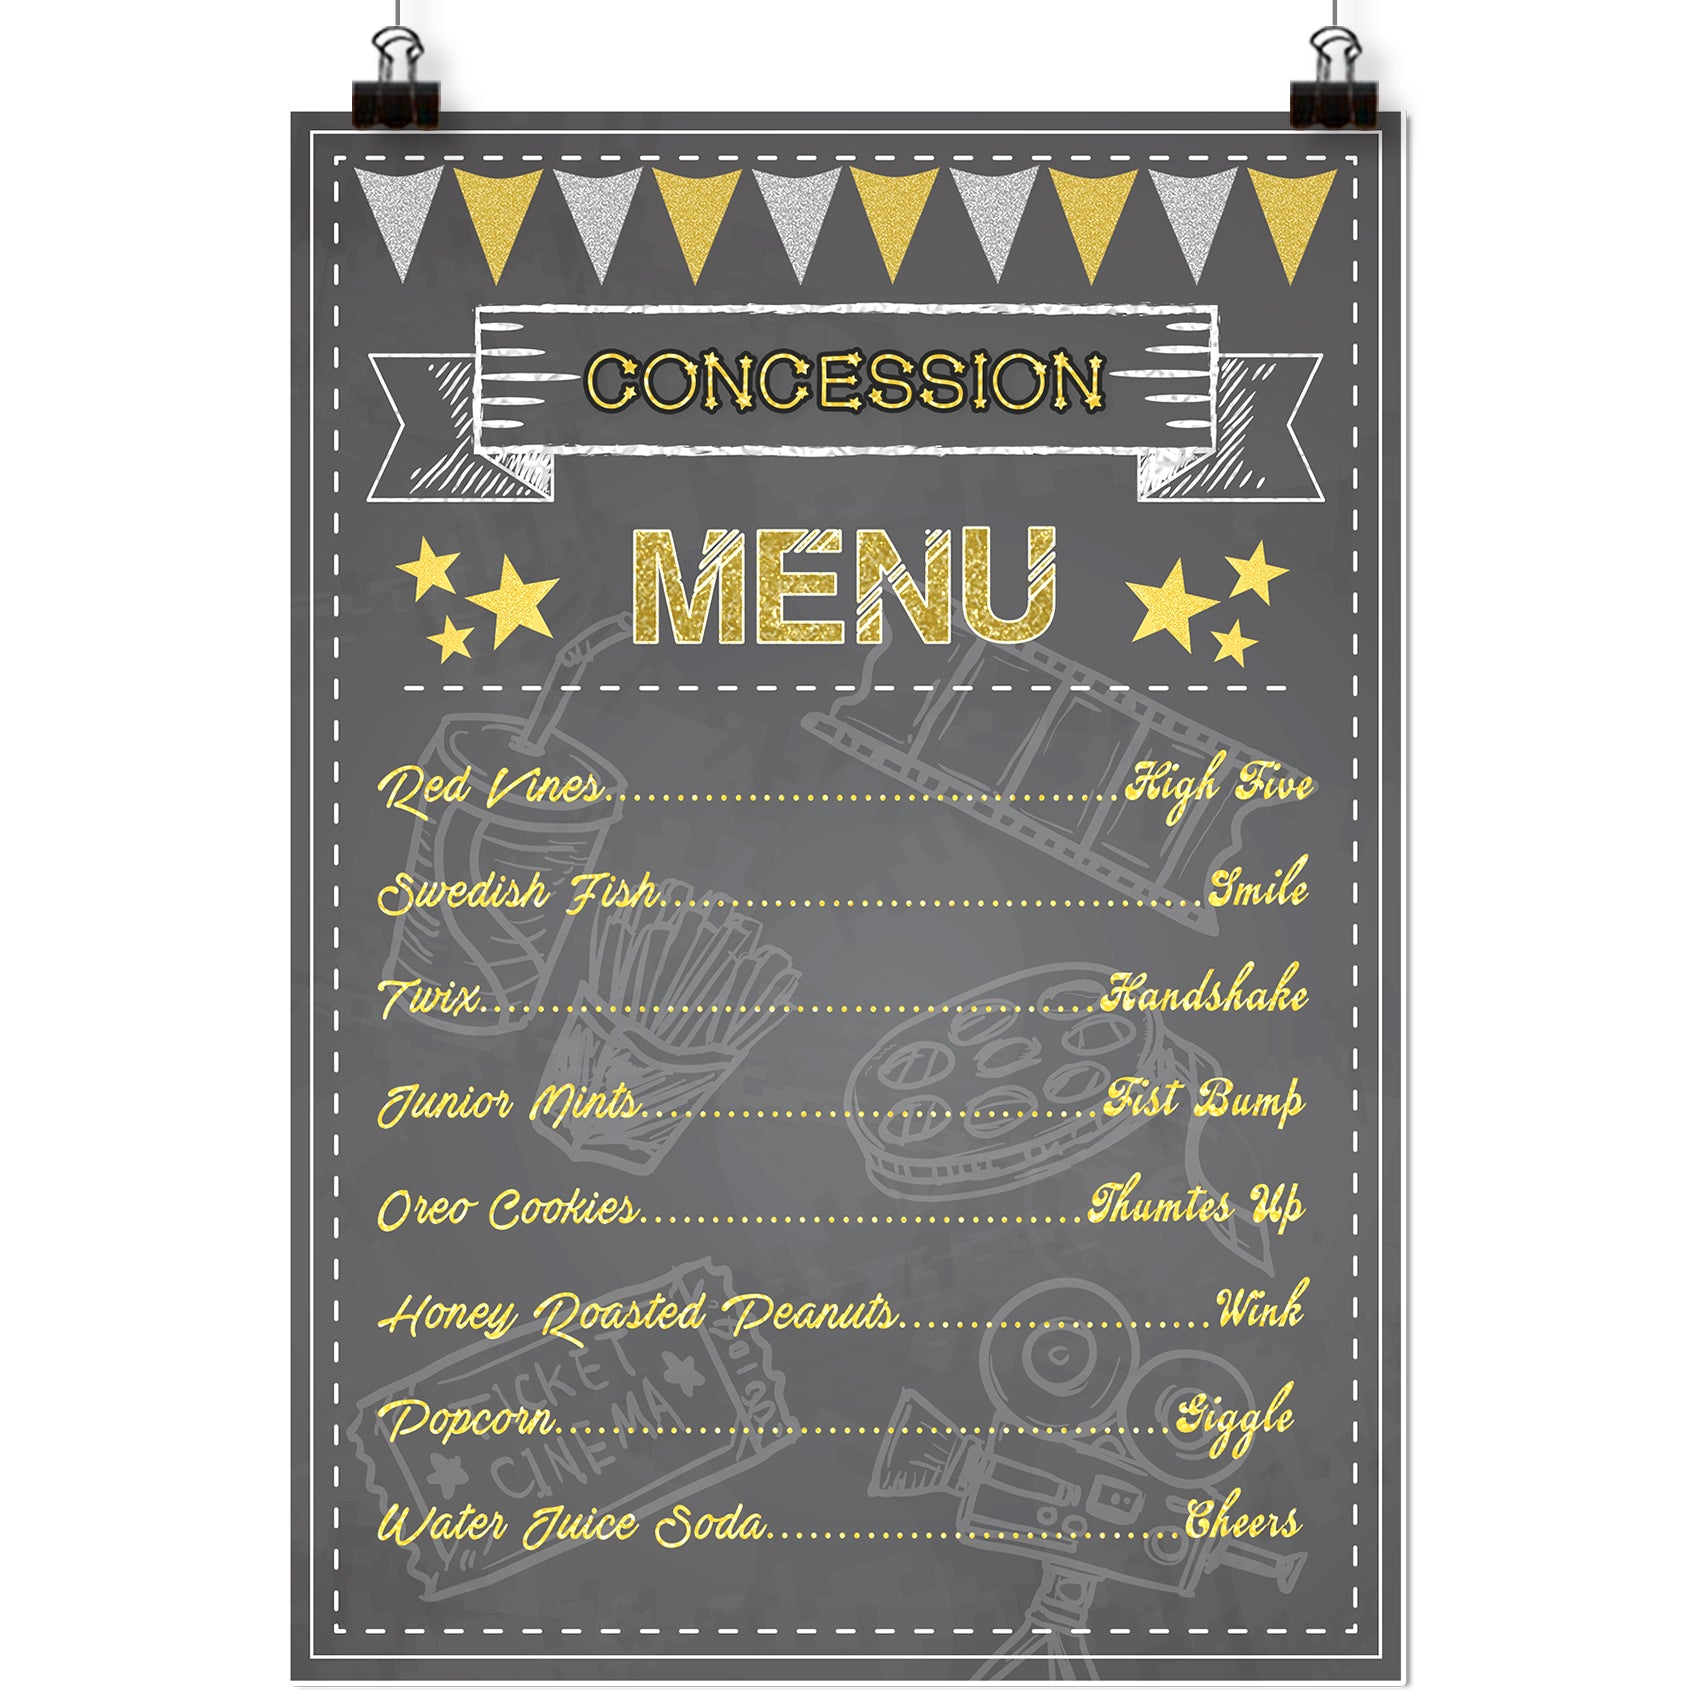 Theater Concession Menu Poster 16x12inch A3